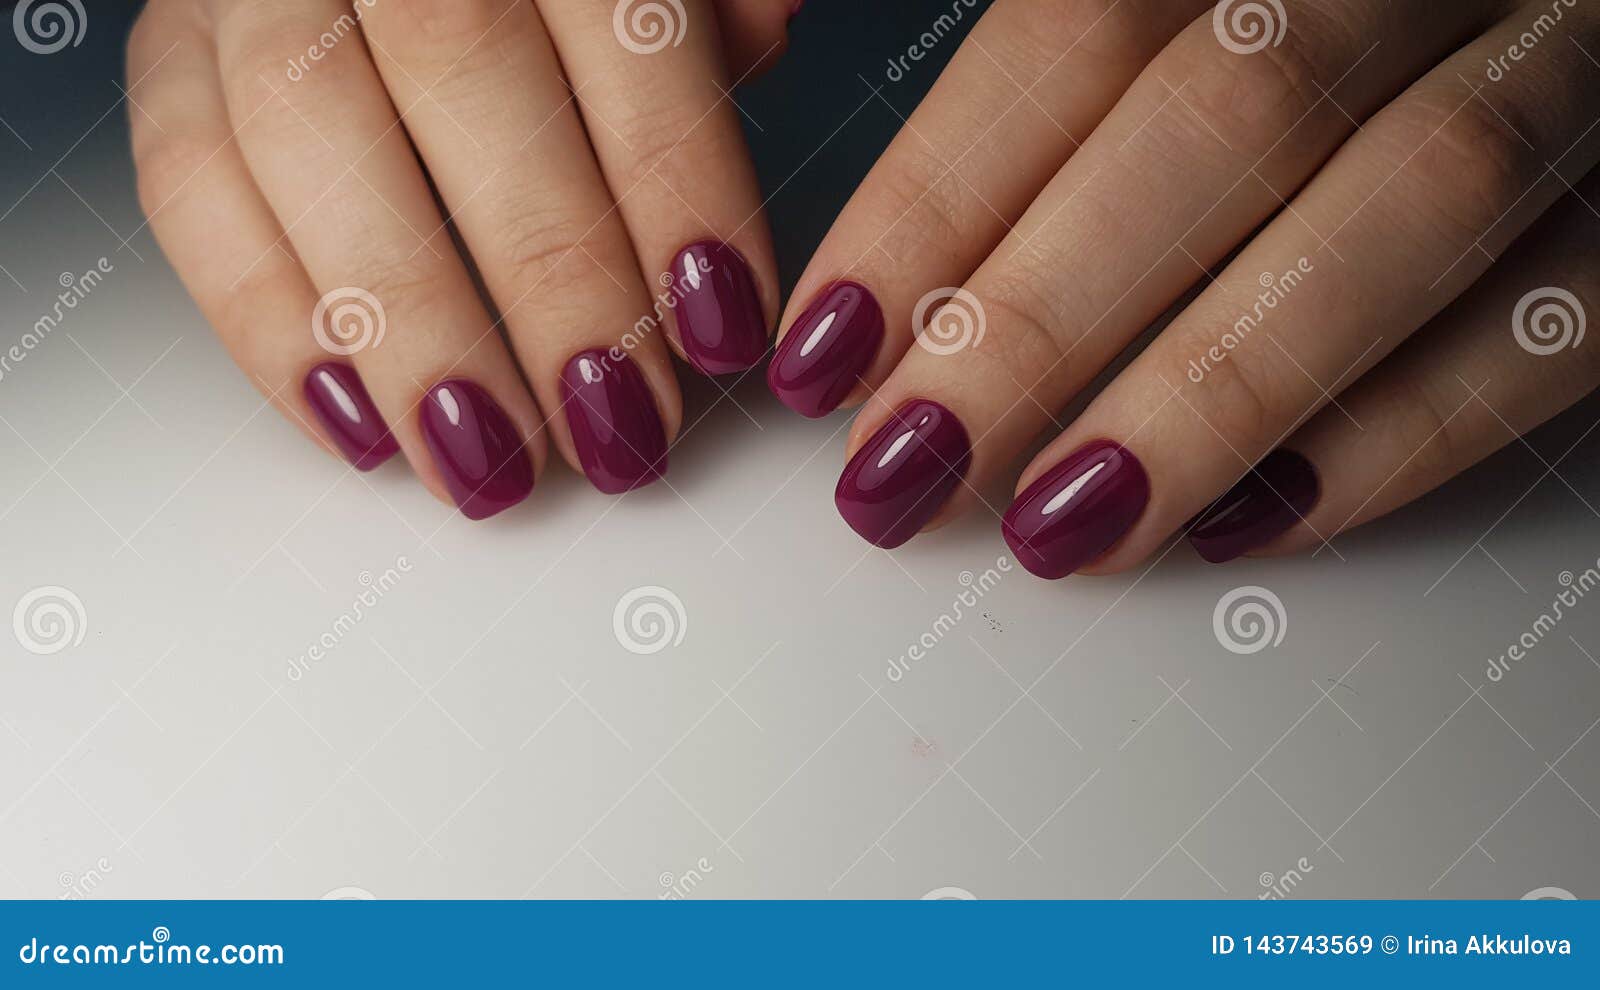 Perfect nails wine color stock image. Image of polish - 143743569